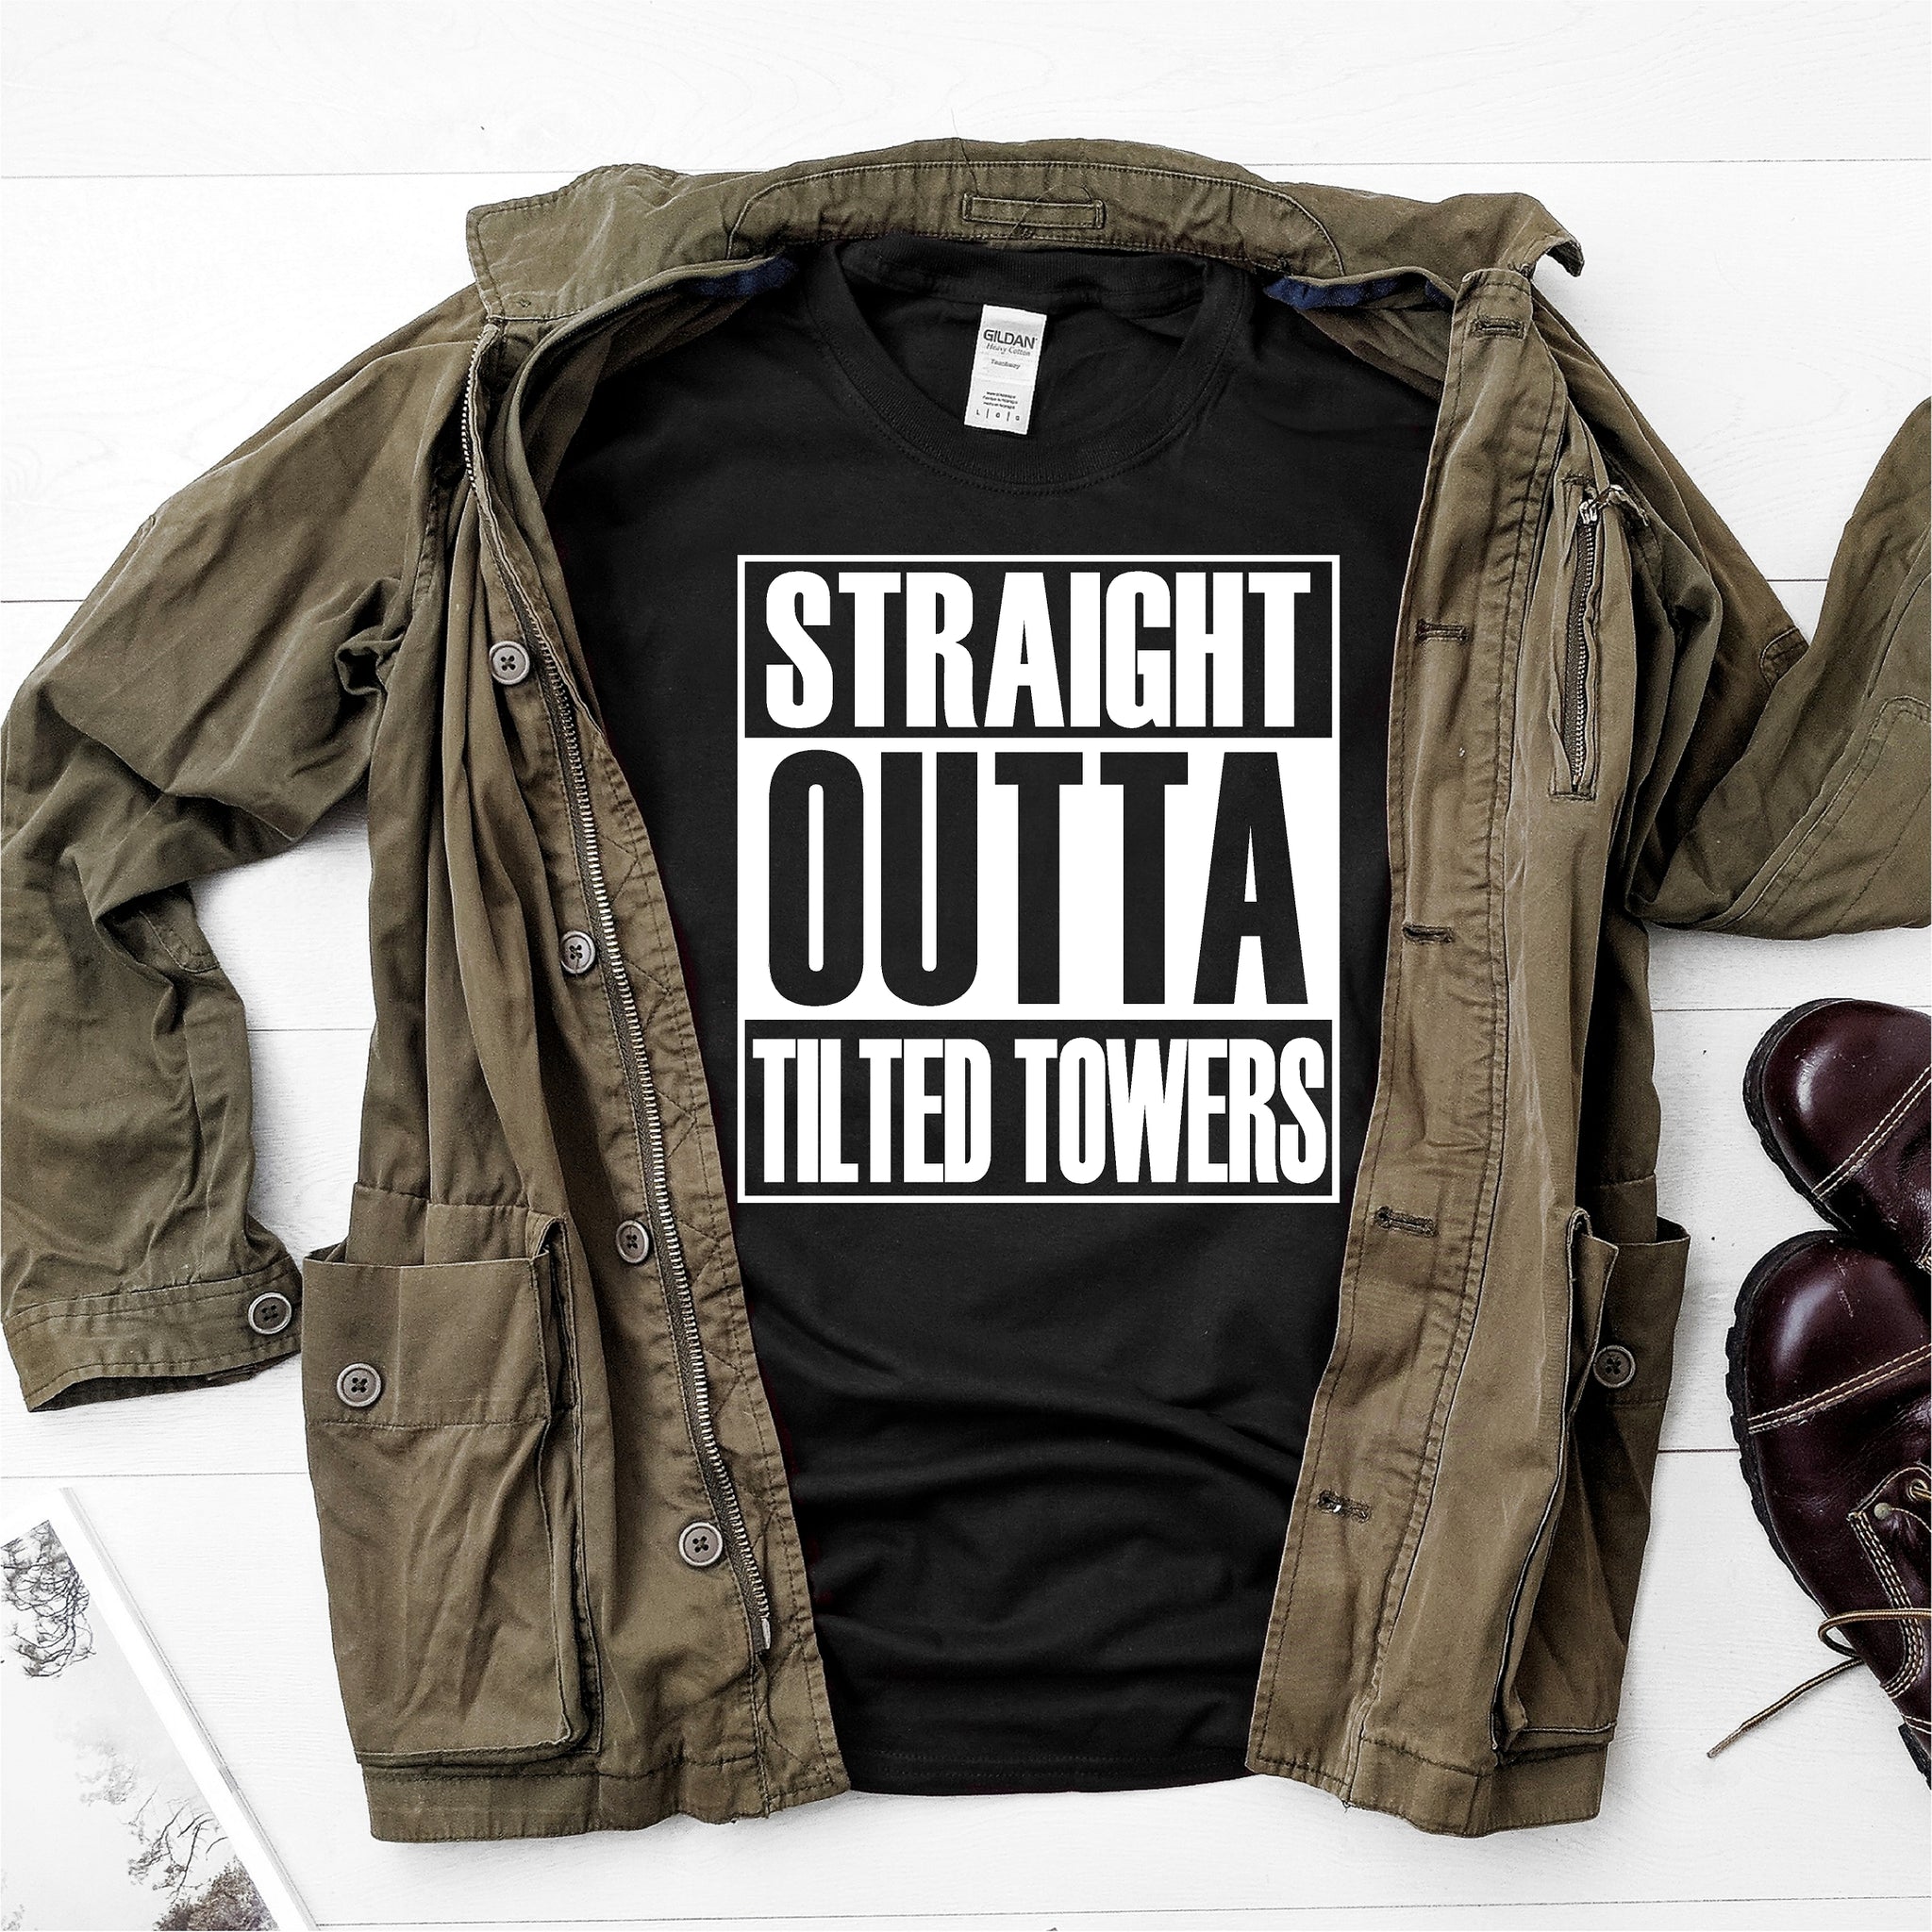 Straight outta tilted towers- Ultra Cotton Short Sleeve T-Shirt - DFHM44